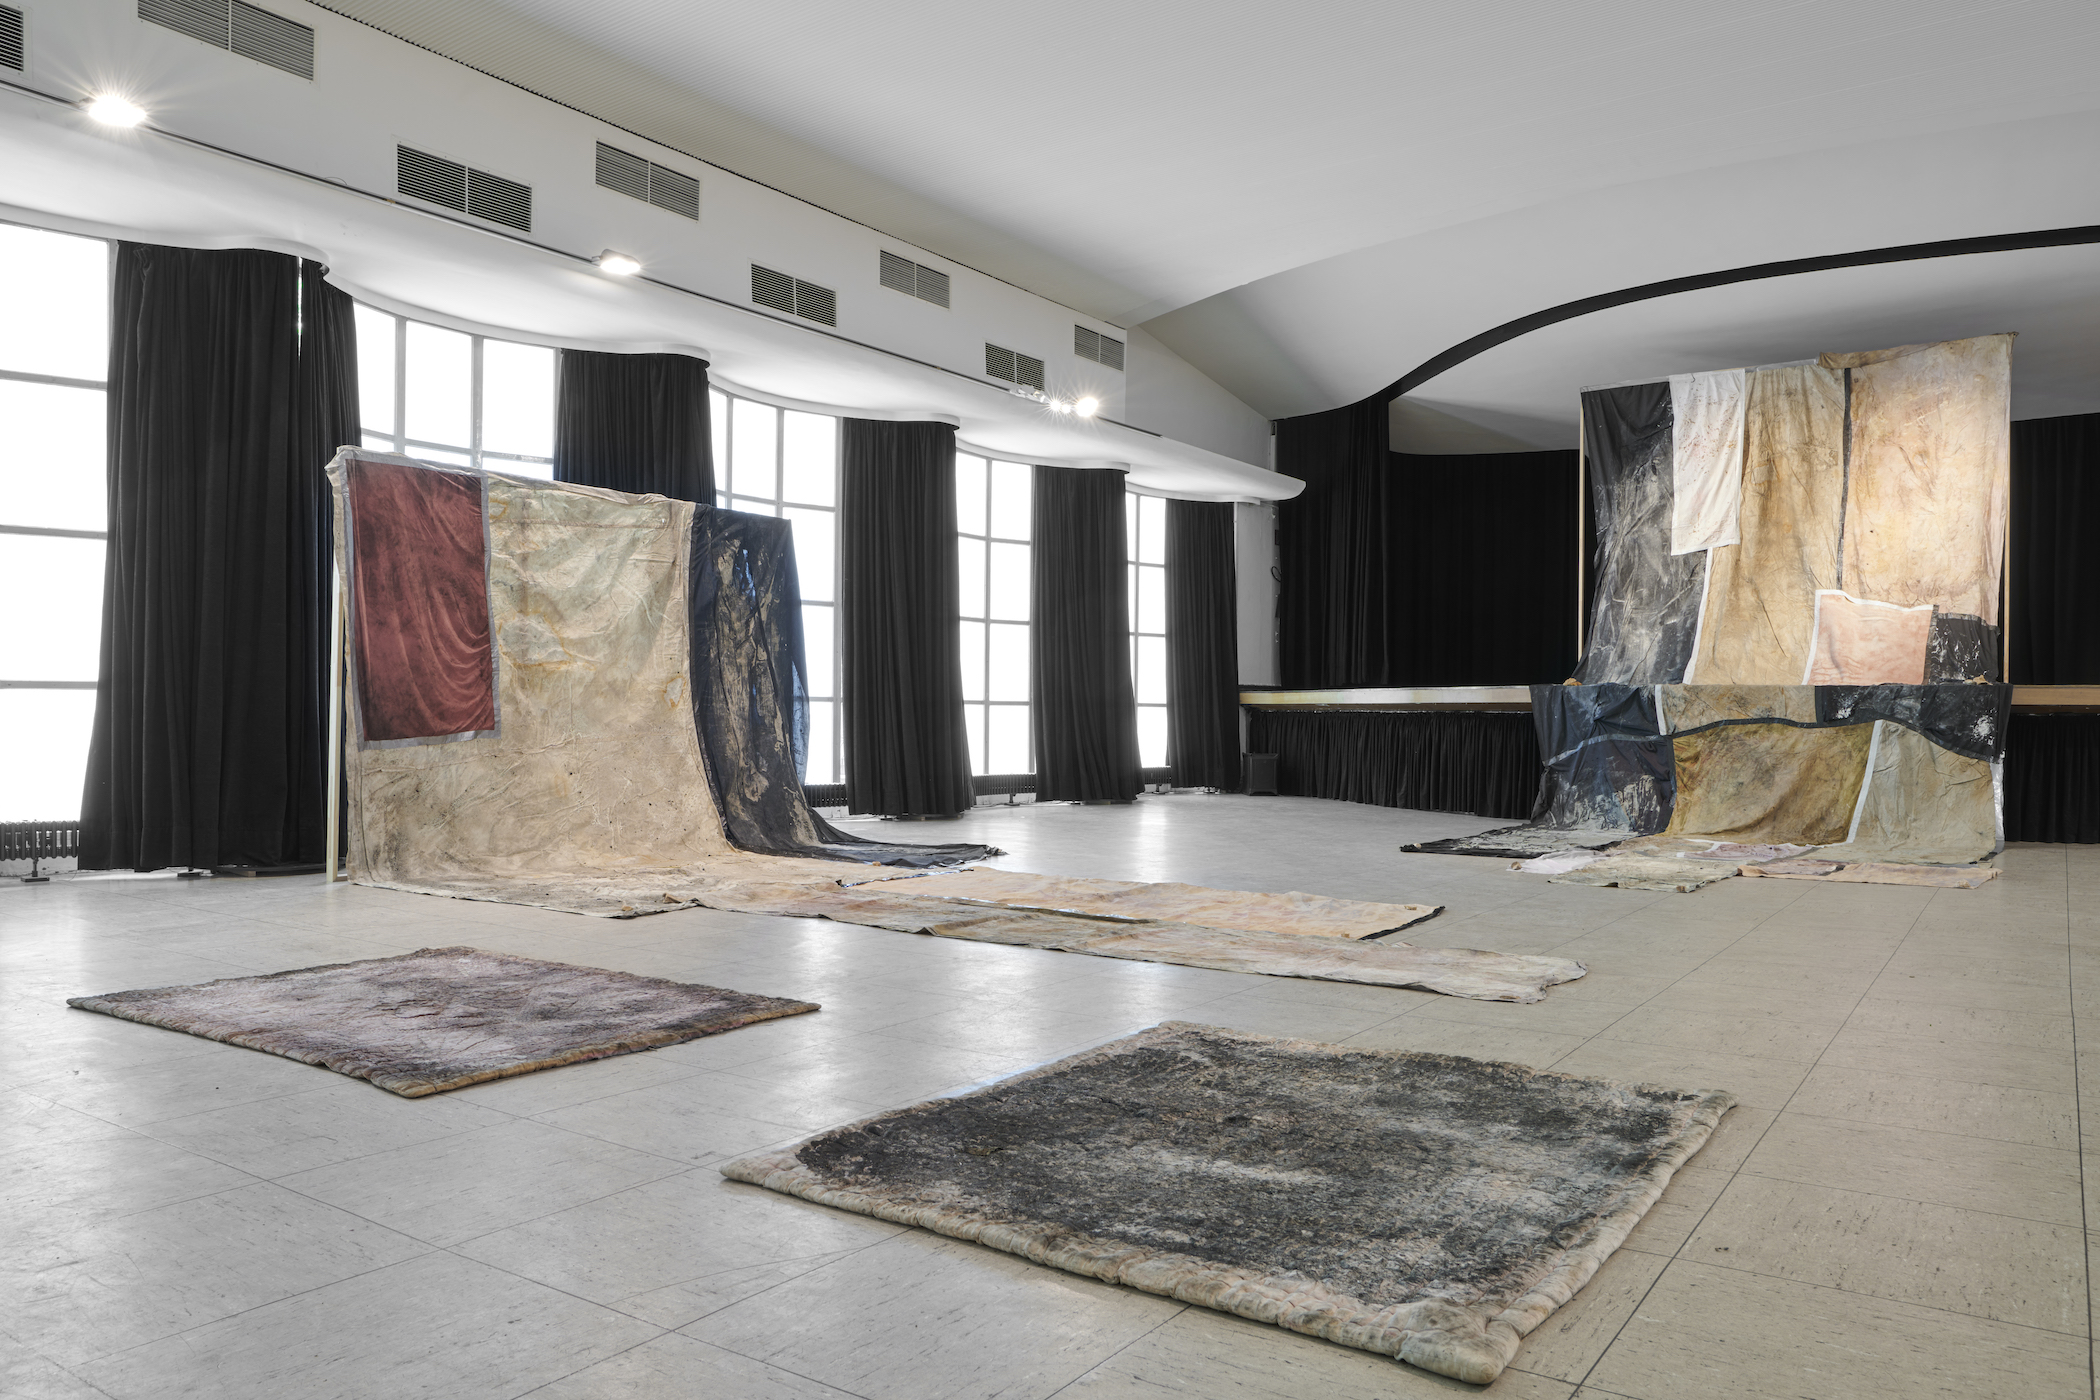 Red in Tooth, 2020, 2021, 2022, discarded fabric, ash, rainwater, soil, installation, Dimensions Variable